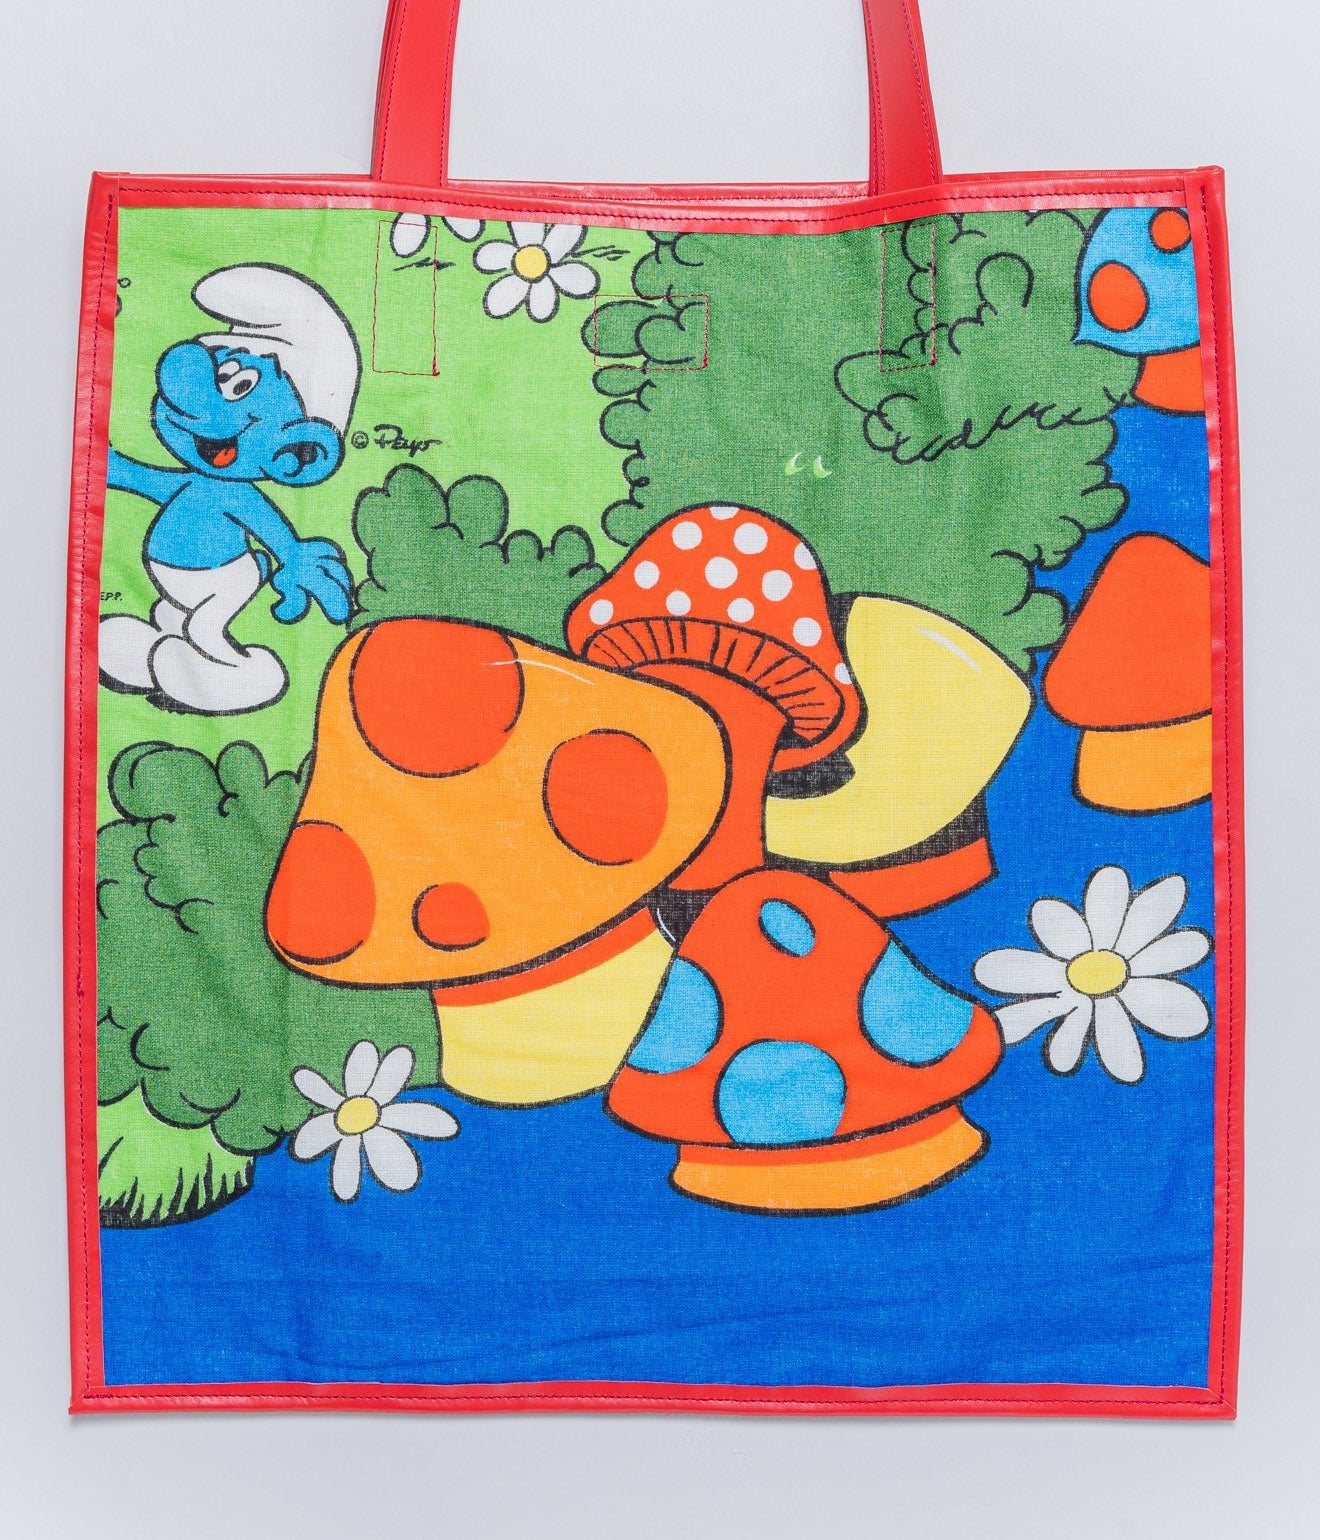 WEAREALLANIMALS UPCYCLE ”Piping Flat Tote -Vintage Smurf Fabric-" #2 - WEAREALLANIMALS